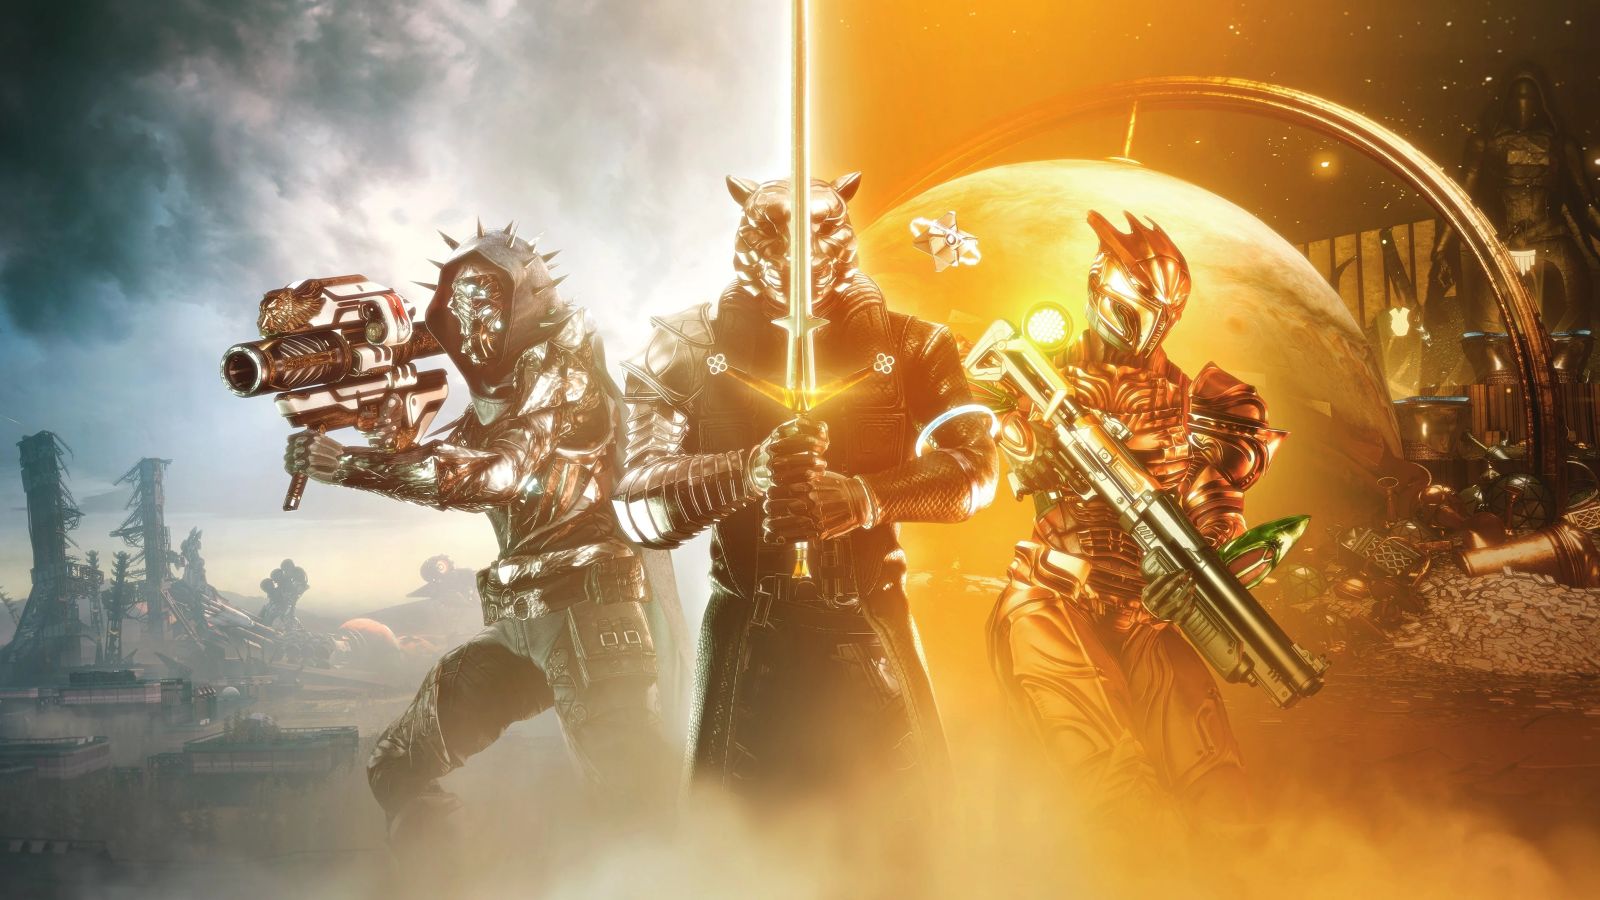 Bungie 30th Anniversary Wallpaper featuriung three guardians with old and new weapons